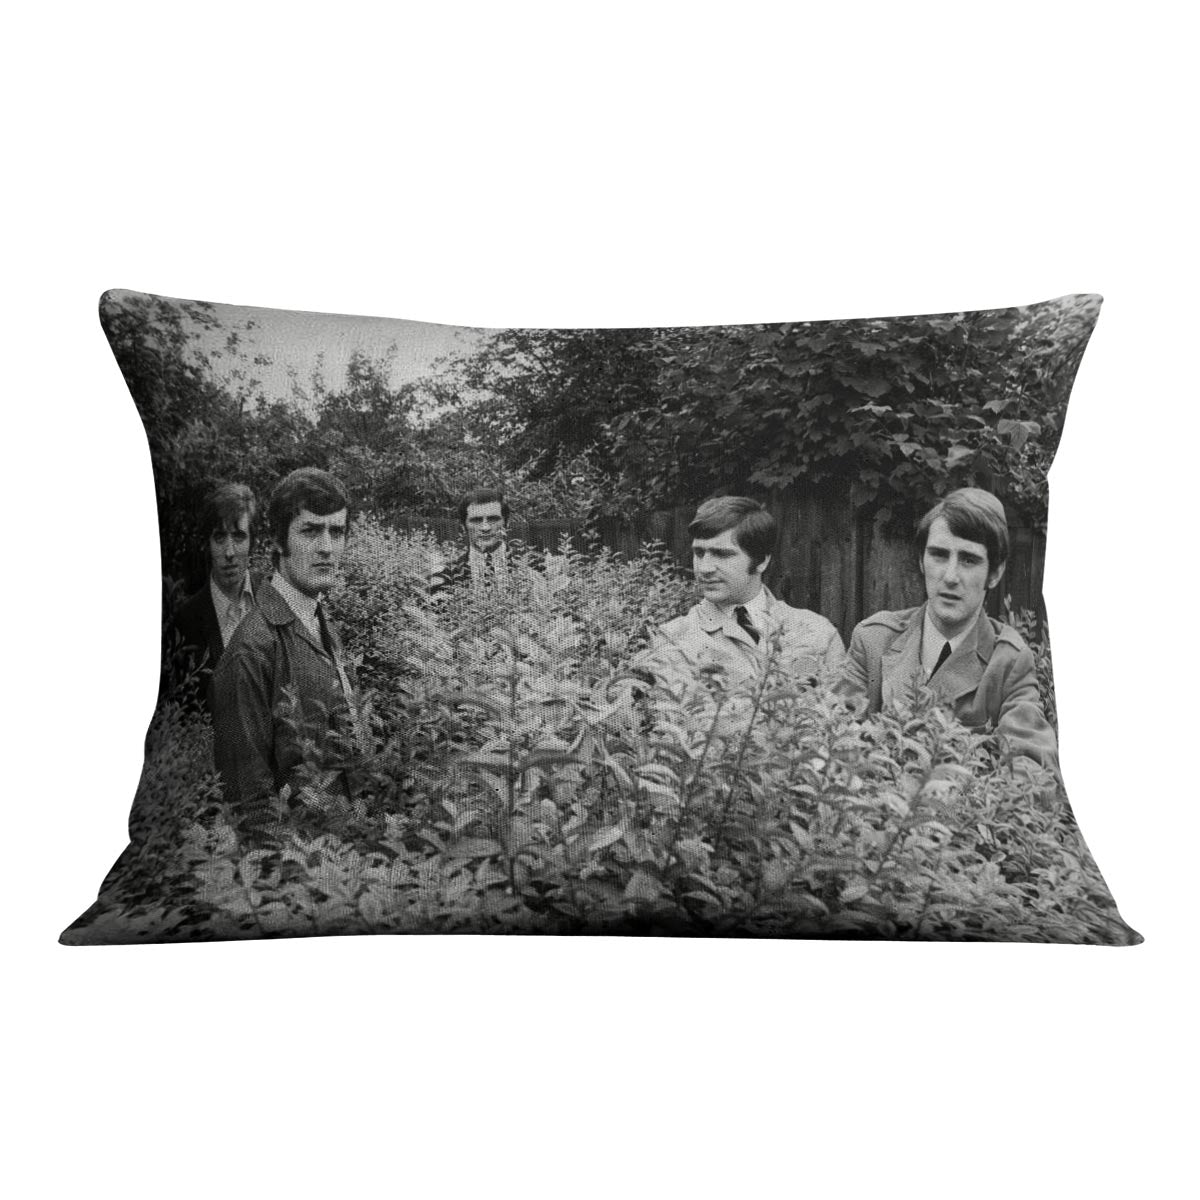 The Moody Blues in a field Cushion